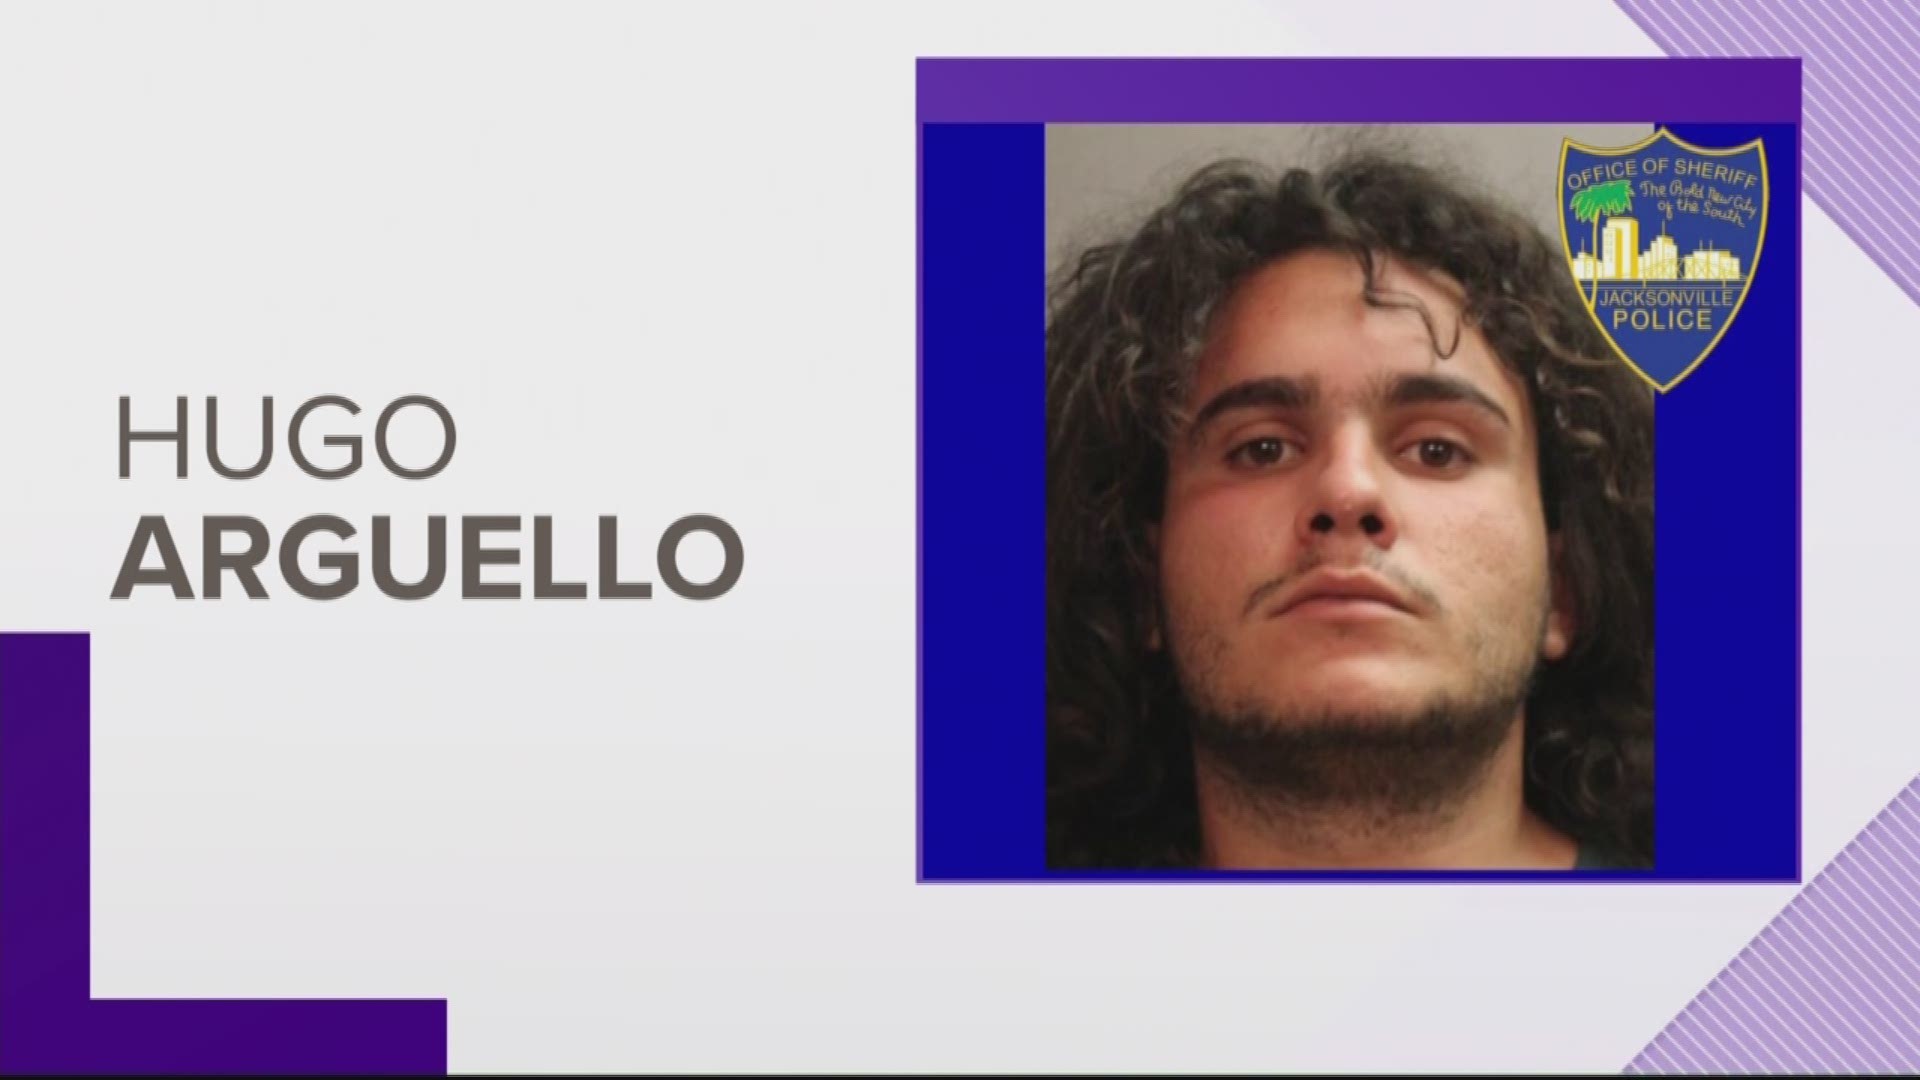 The man, who later died, reportedly tried to reach into the vehicle and take drugs from Baumann-Arguello's lap. In turn, Baumann-Arguello shot him.